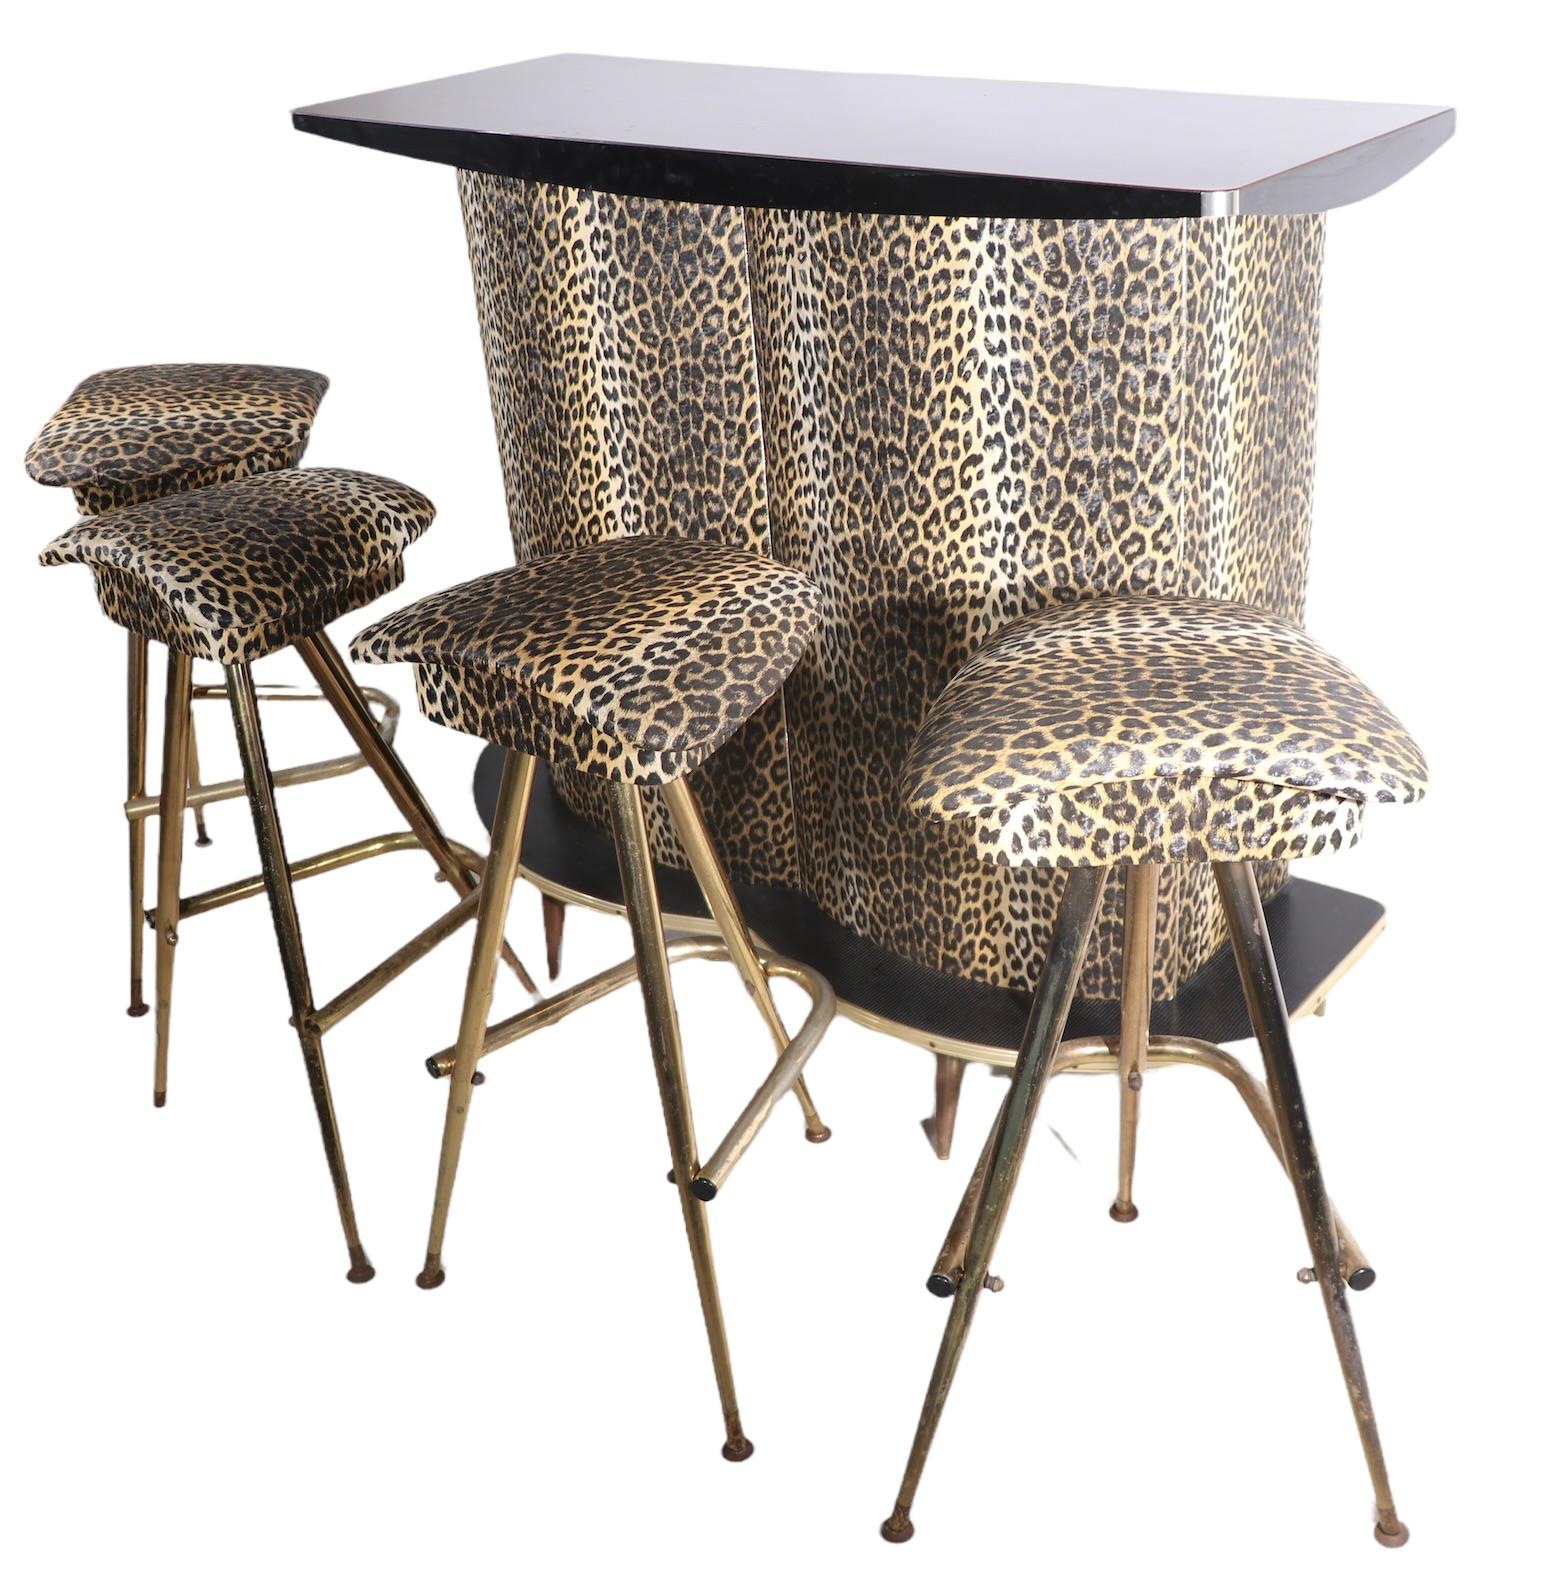 Way cool counter bar in cheetah vinyl and faux wood formica laminate, with 4 original matching stools. It doesn't get much funkier than this throw back set from back in the day. Structurally sound and sturdy, the metal finish on the bar stools shows